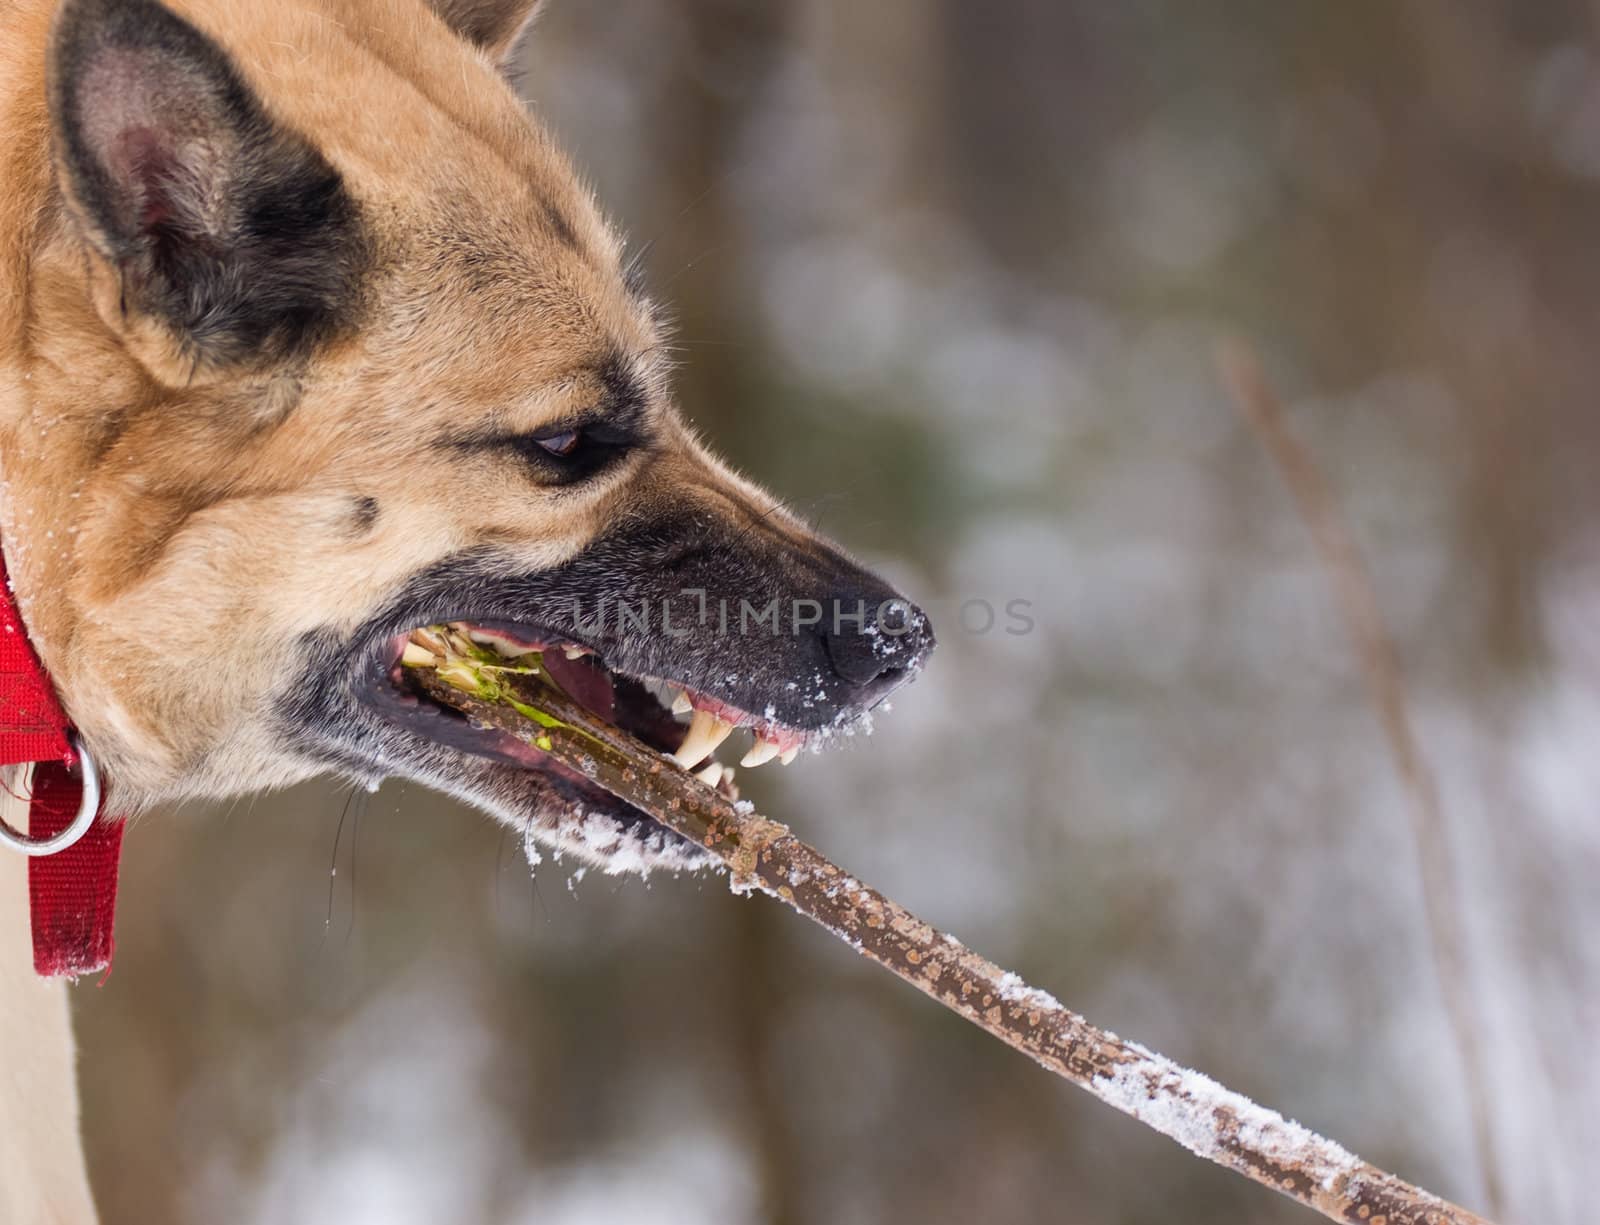 Aggressively looking dog gnawing a stick by saasemen